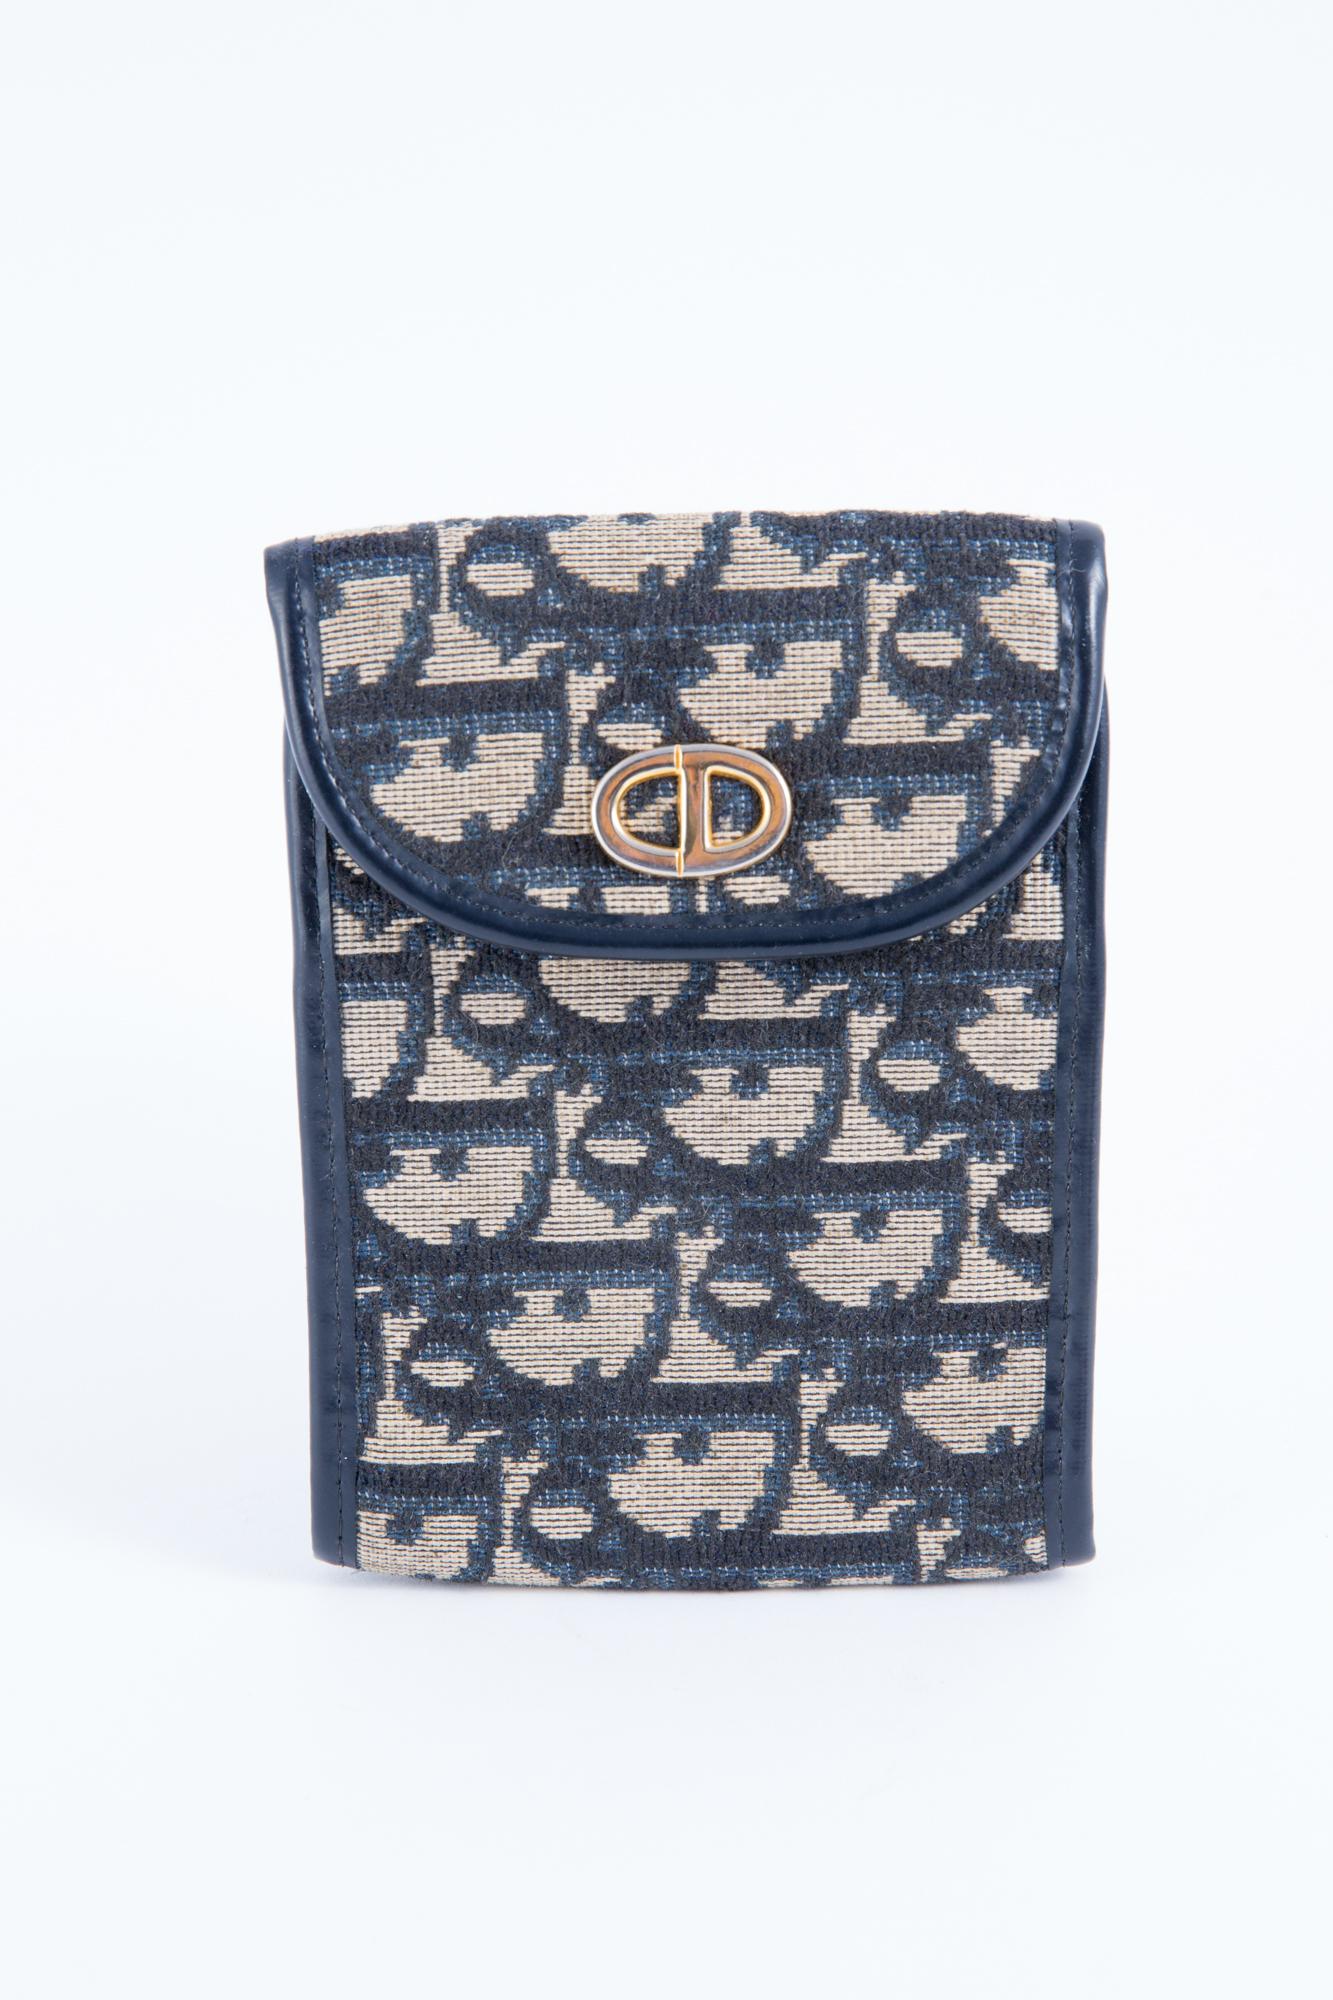 1970s Dior navy cotton monogram check book featuring an all over logo pattern, a snap opening, a navy leather piping, an inside leather lining an inside gold tone logo stamp.
Total length closed:11.4in. (29cm)
Width:3.5in. (9cm)
In excellent vintage